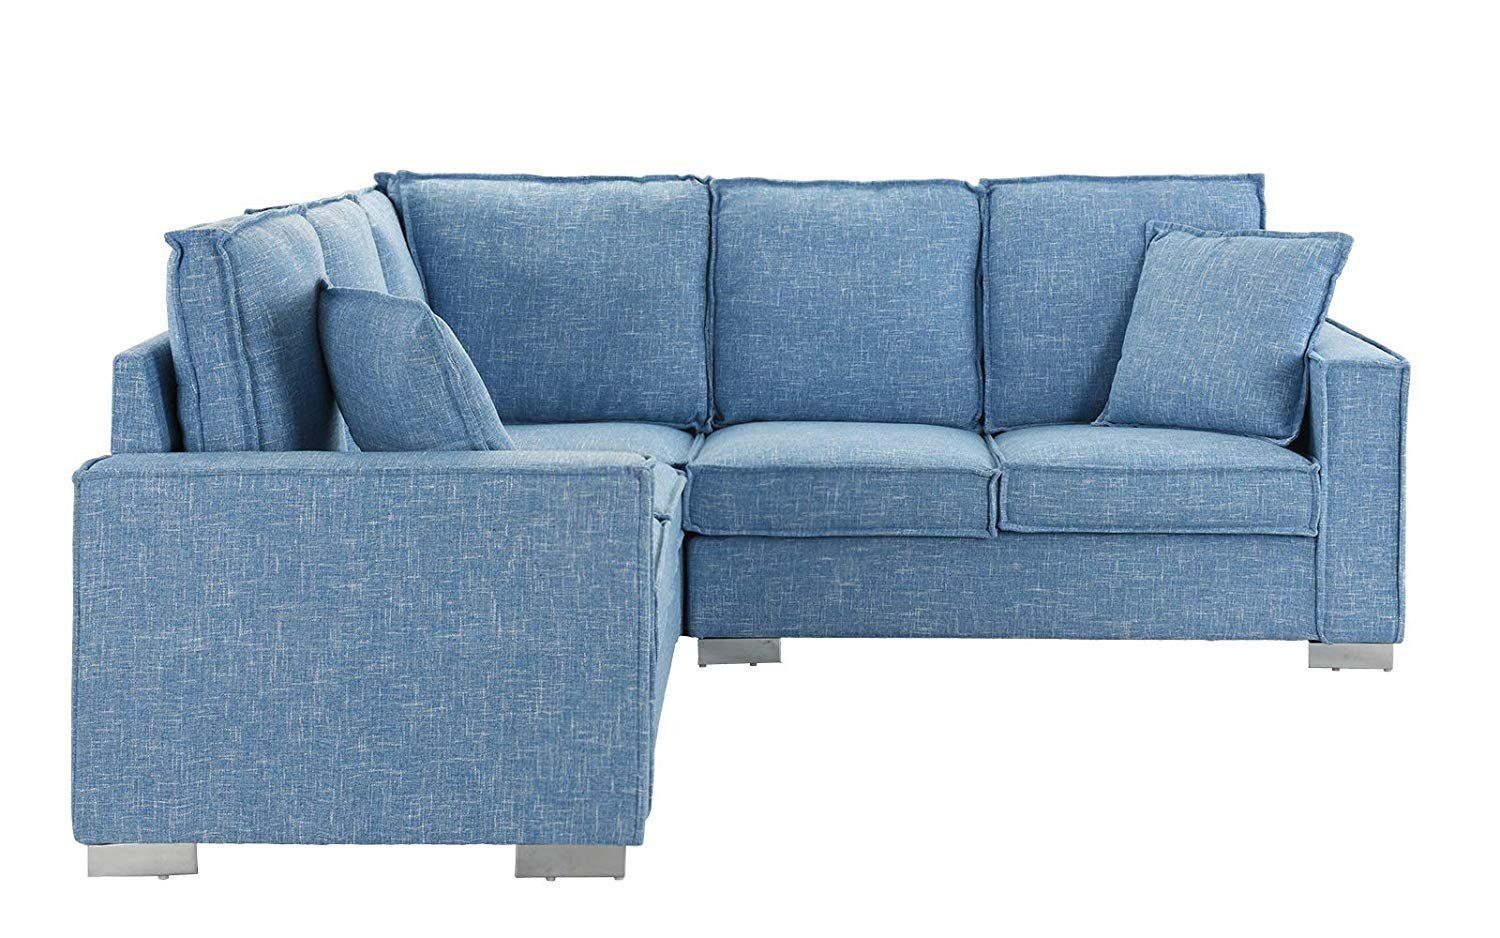 Modern Living Room Linen Fabric Sectional Sofa, L Shape Couch, 2 With Regard To Modern Blue Linen Sofas (View 2 of 20)